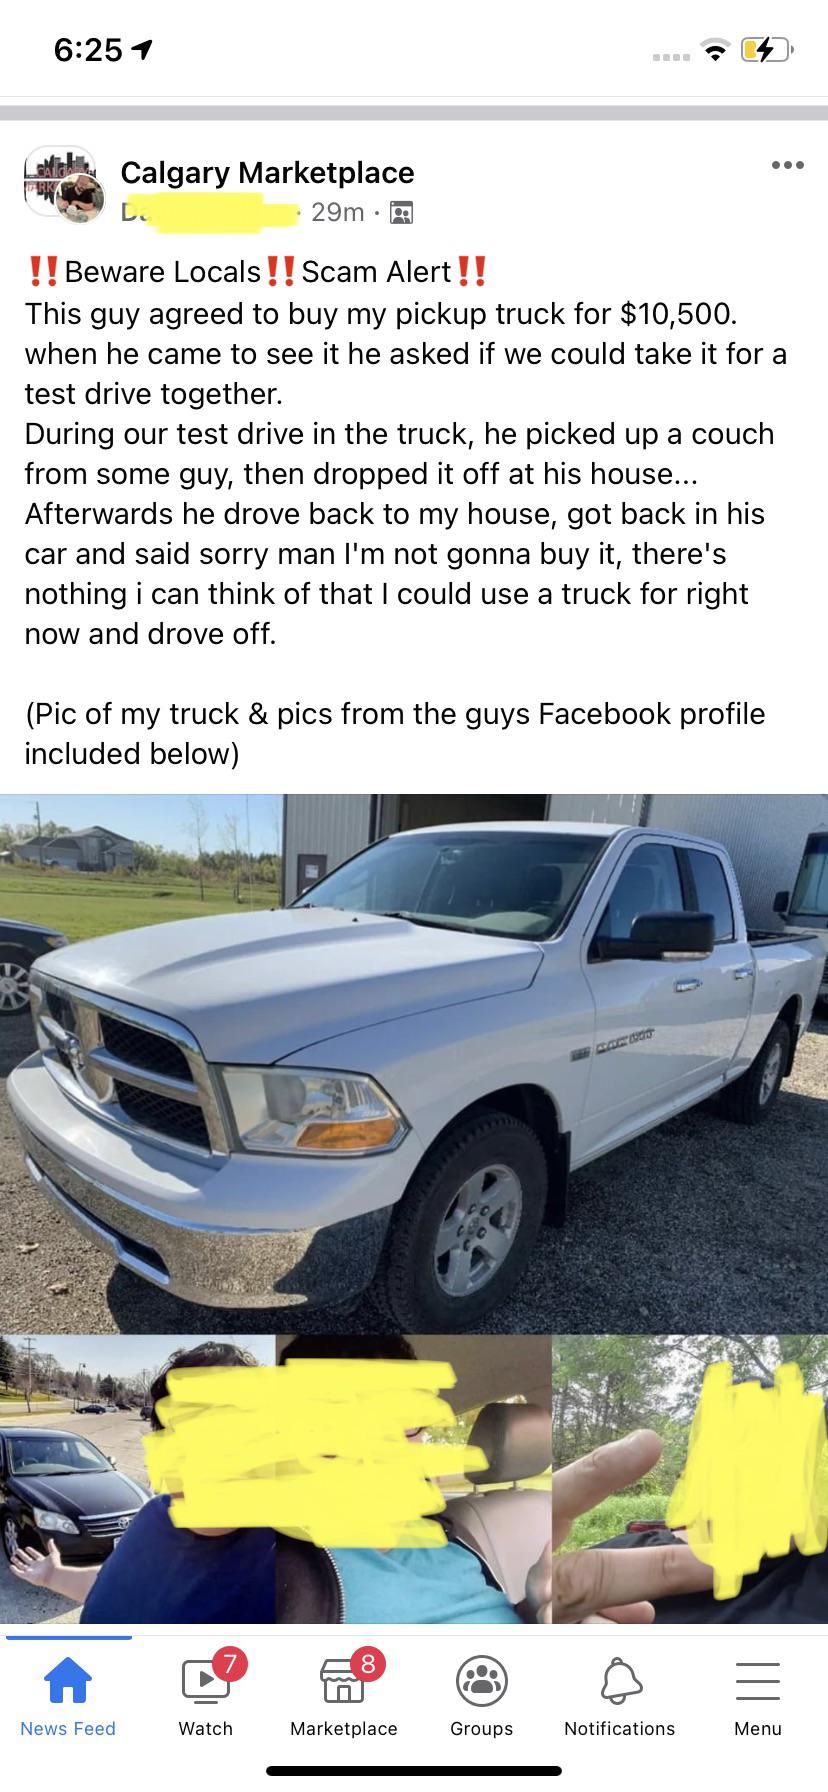 Somebody attempted to sell a truck in the city I live in.